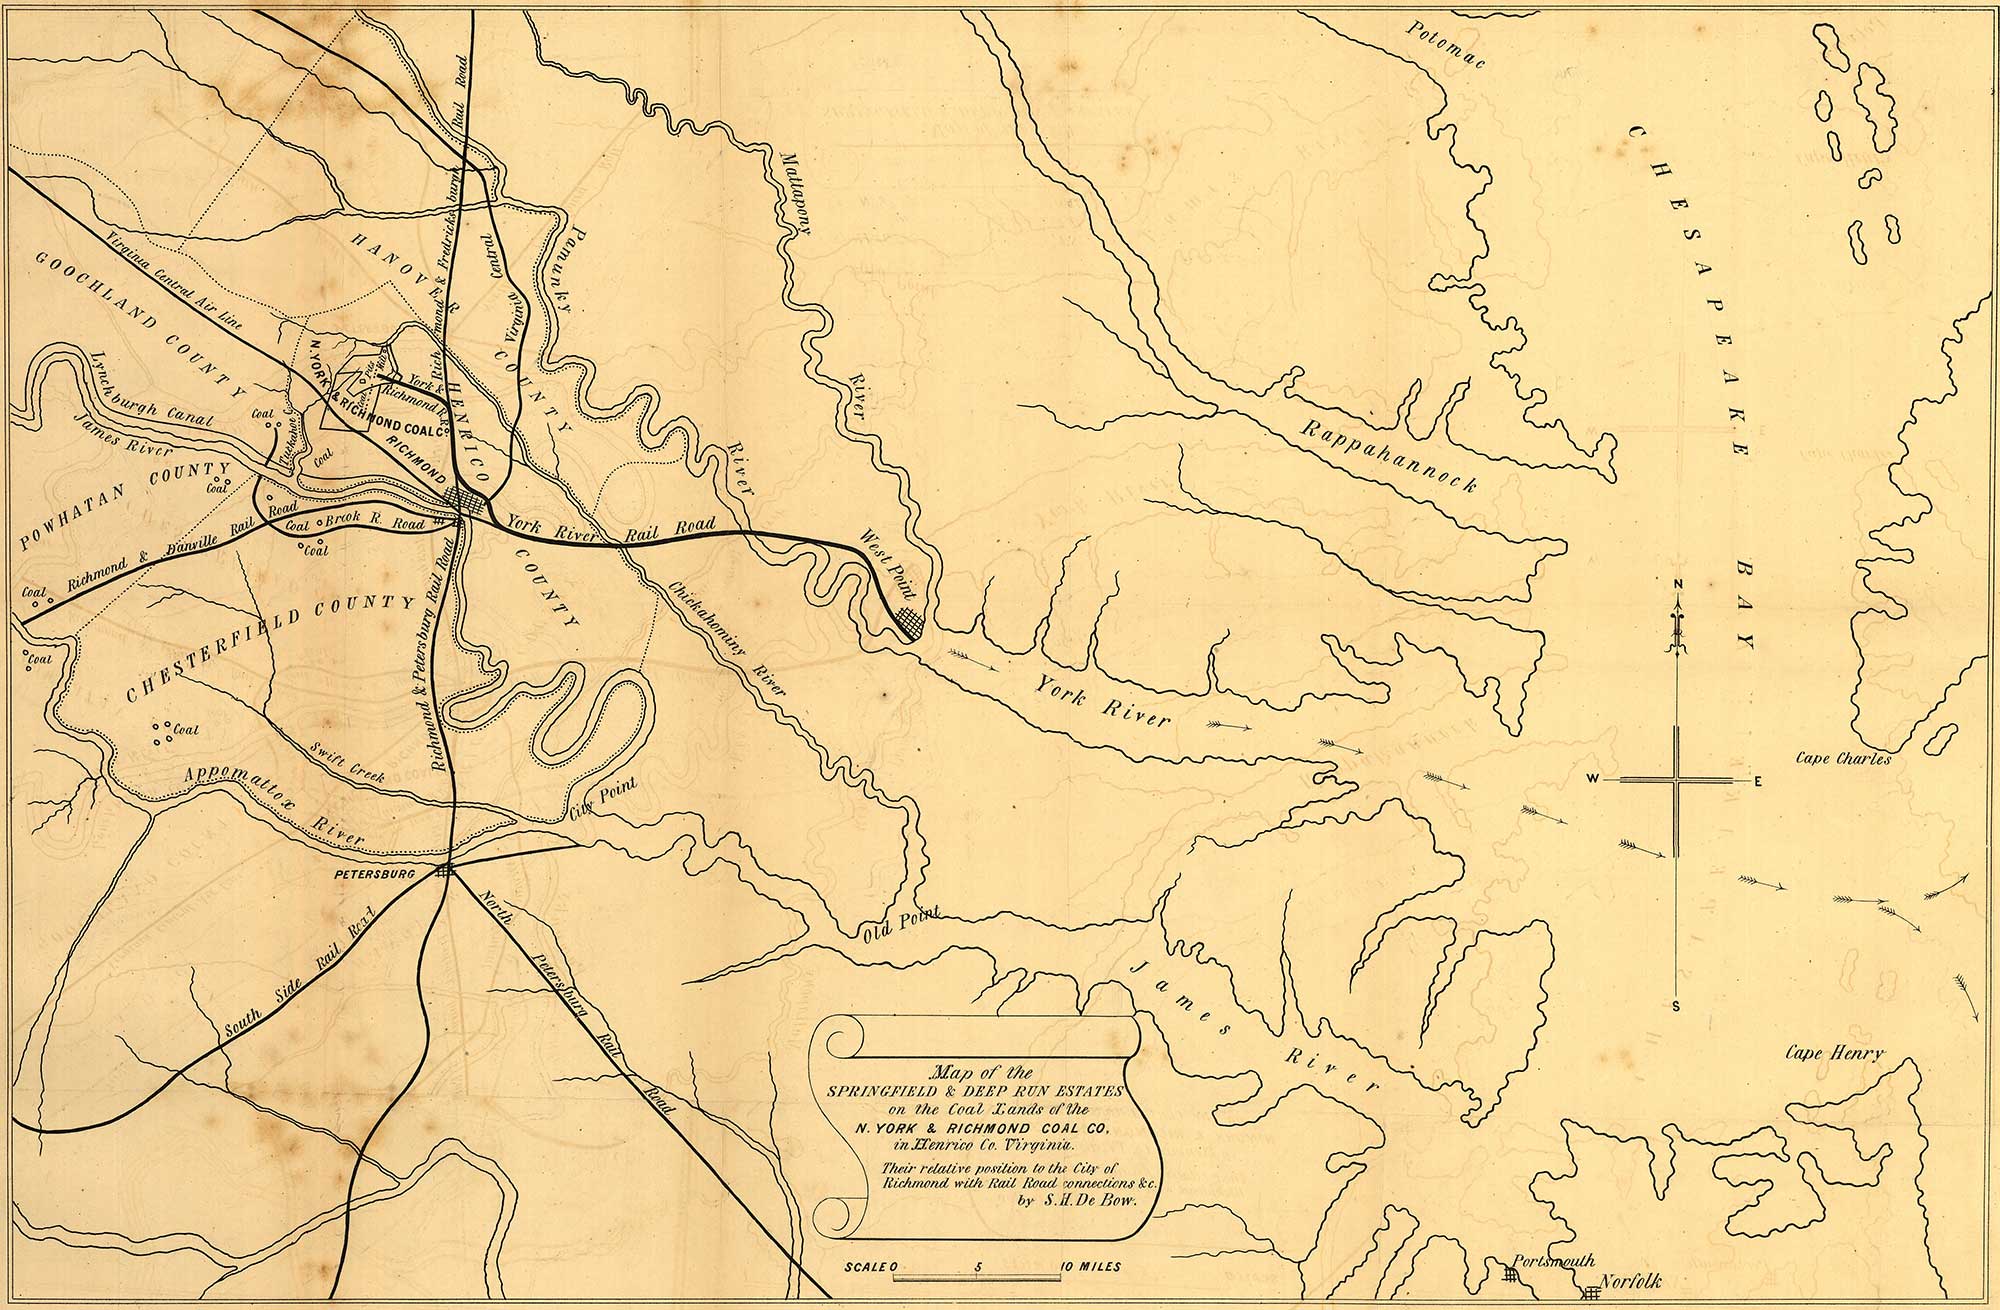 1856 Map of the Richmond, Virginia, region showing locations of coal deposits.